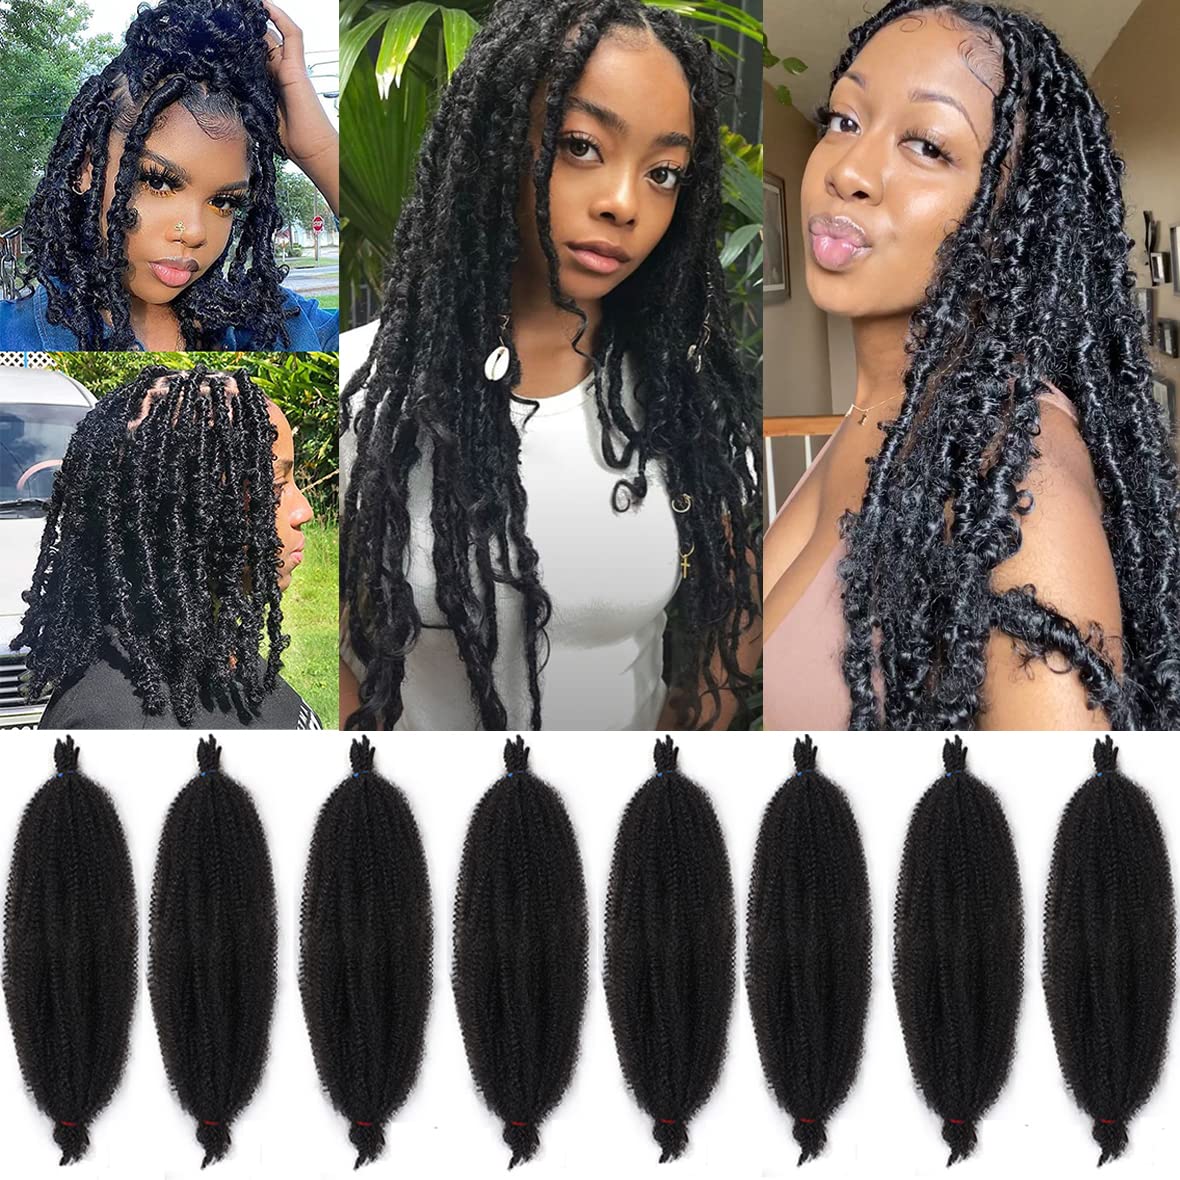 Leeven 24 Inch Pre-Separated Springy Afro Twist Hair 8 Packs Popping Spring Twist Hair for Marley Locs Twist Braiding Hair 8 Strands/Pack Black Pre-fluffed Afro Kinky Marley Hair Extensions /1B#